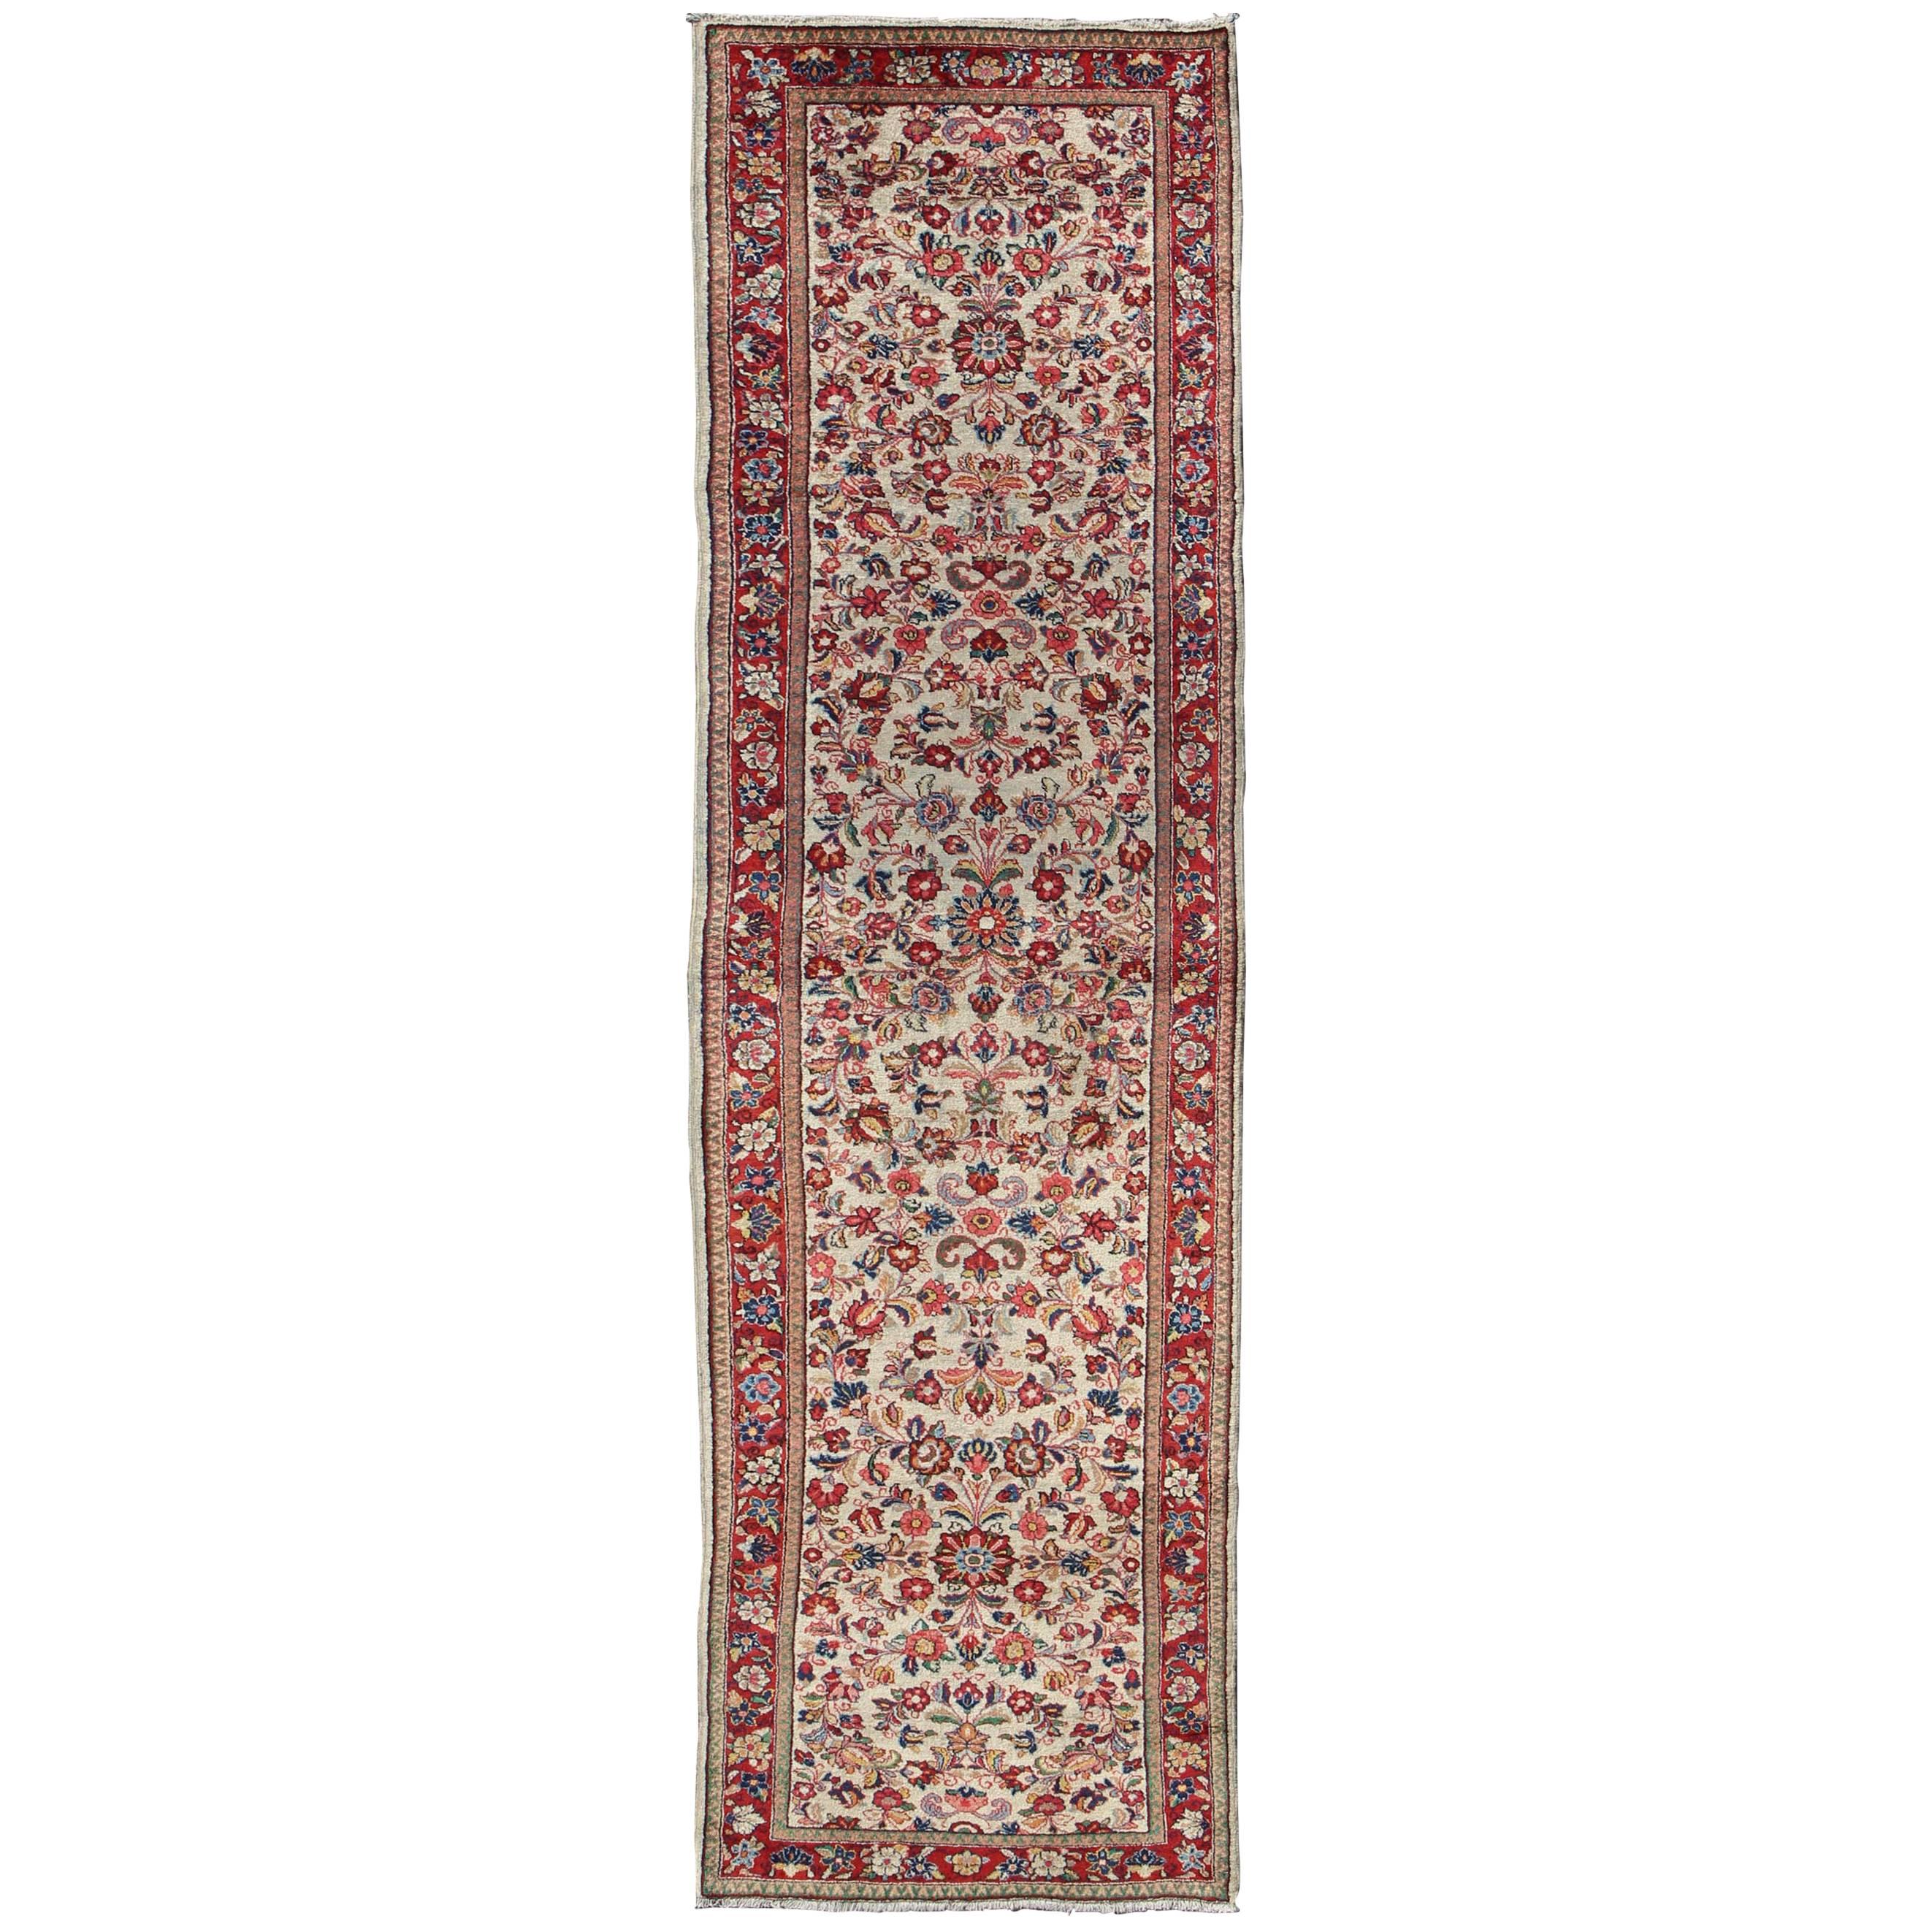 Antique Persian Sarouk Rug with All-Over Floral Design in Rich Red and Ivory